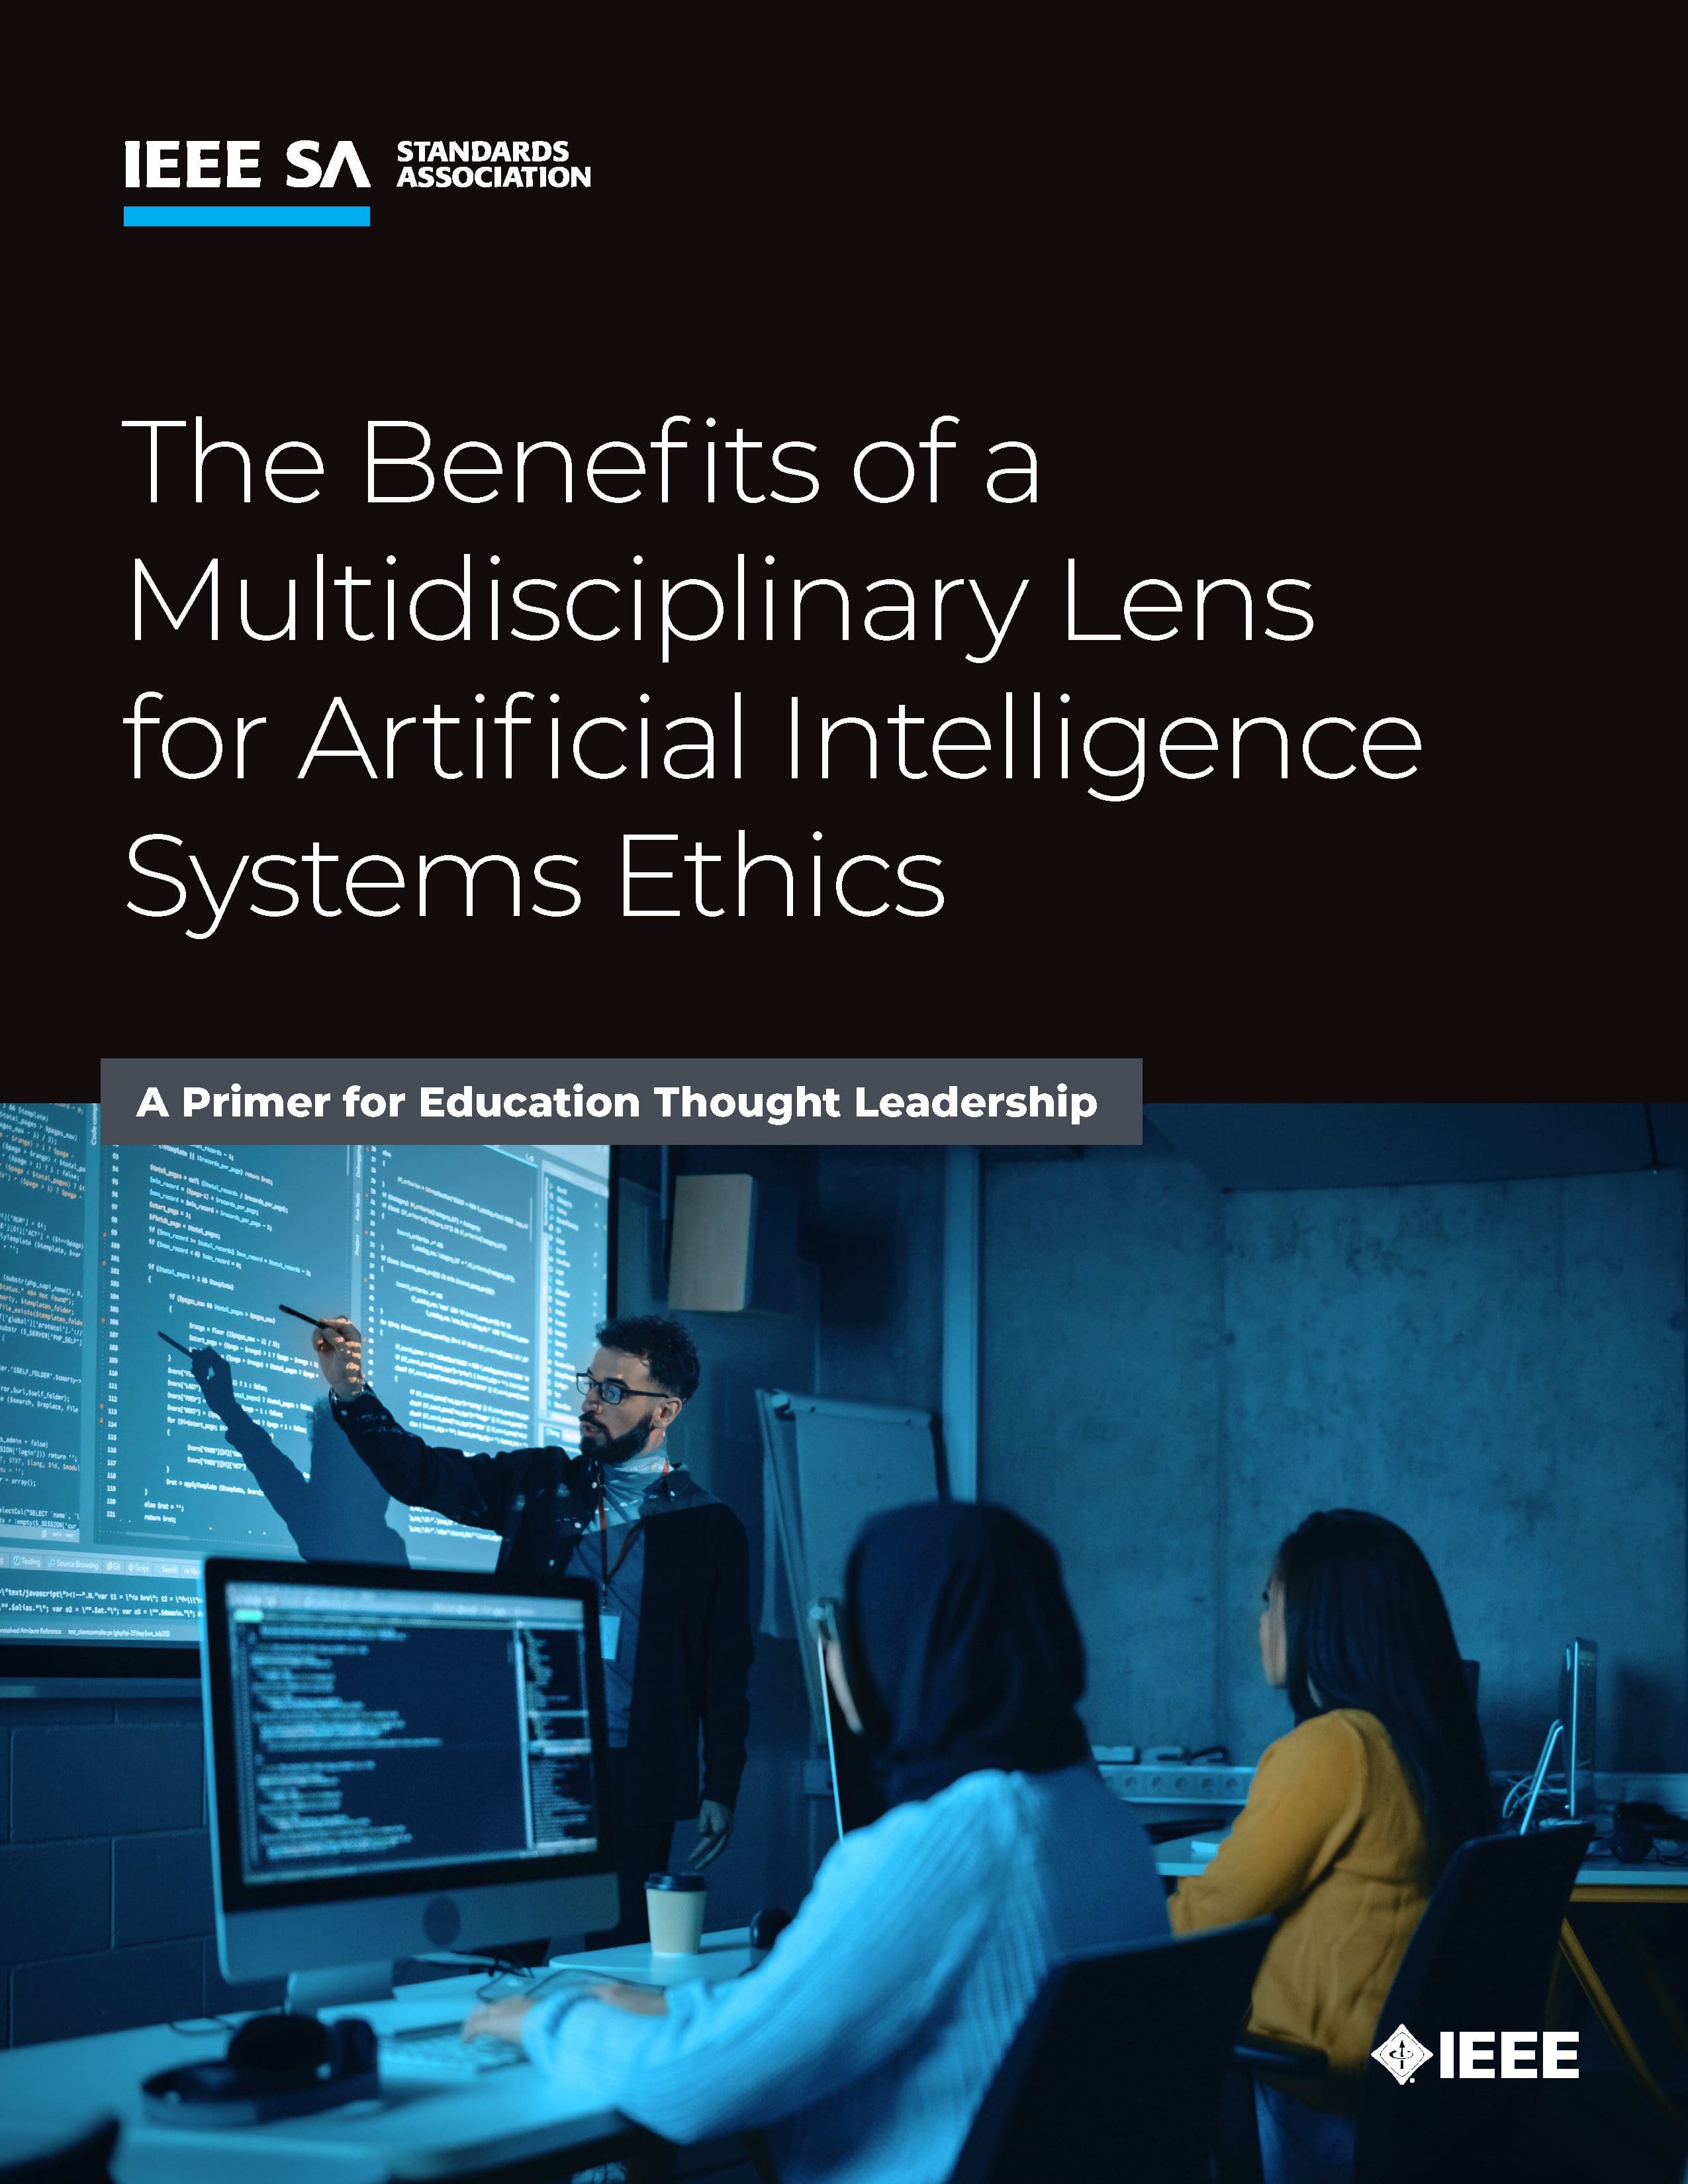 The Benefits of a Multidisciplinary Lens for Artificial Intelligence Systems Ethics: A Primer for Education Thought Leadership cover.